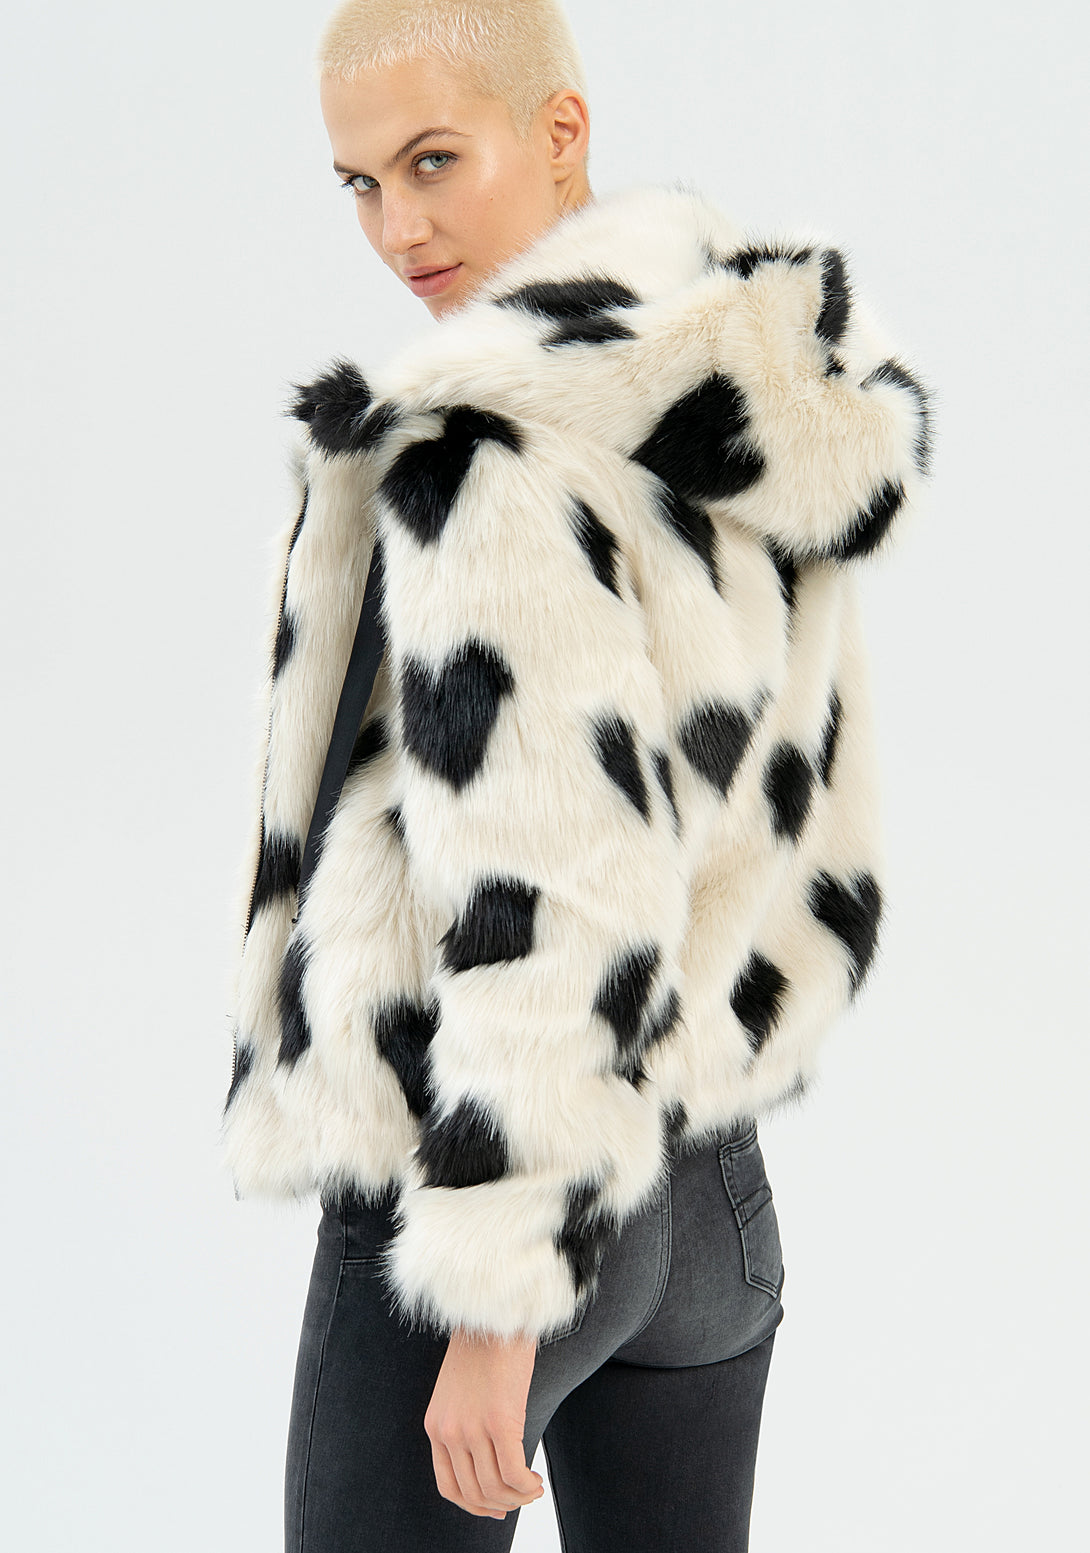 Jacket over fit made in eco fur with heart shape pattern Fracomina FP22WC4001W56301-109-4